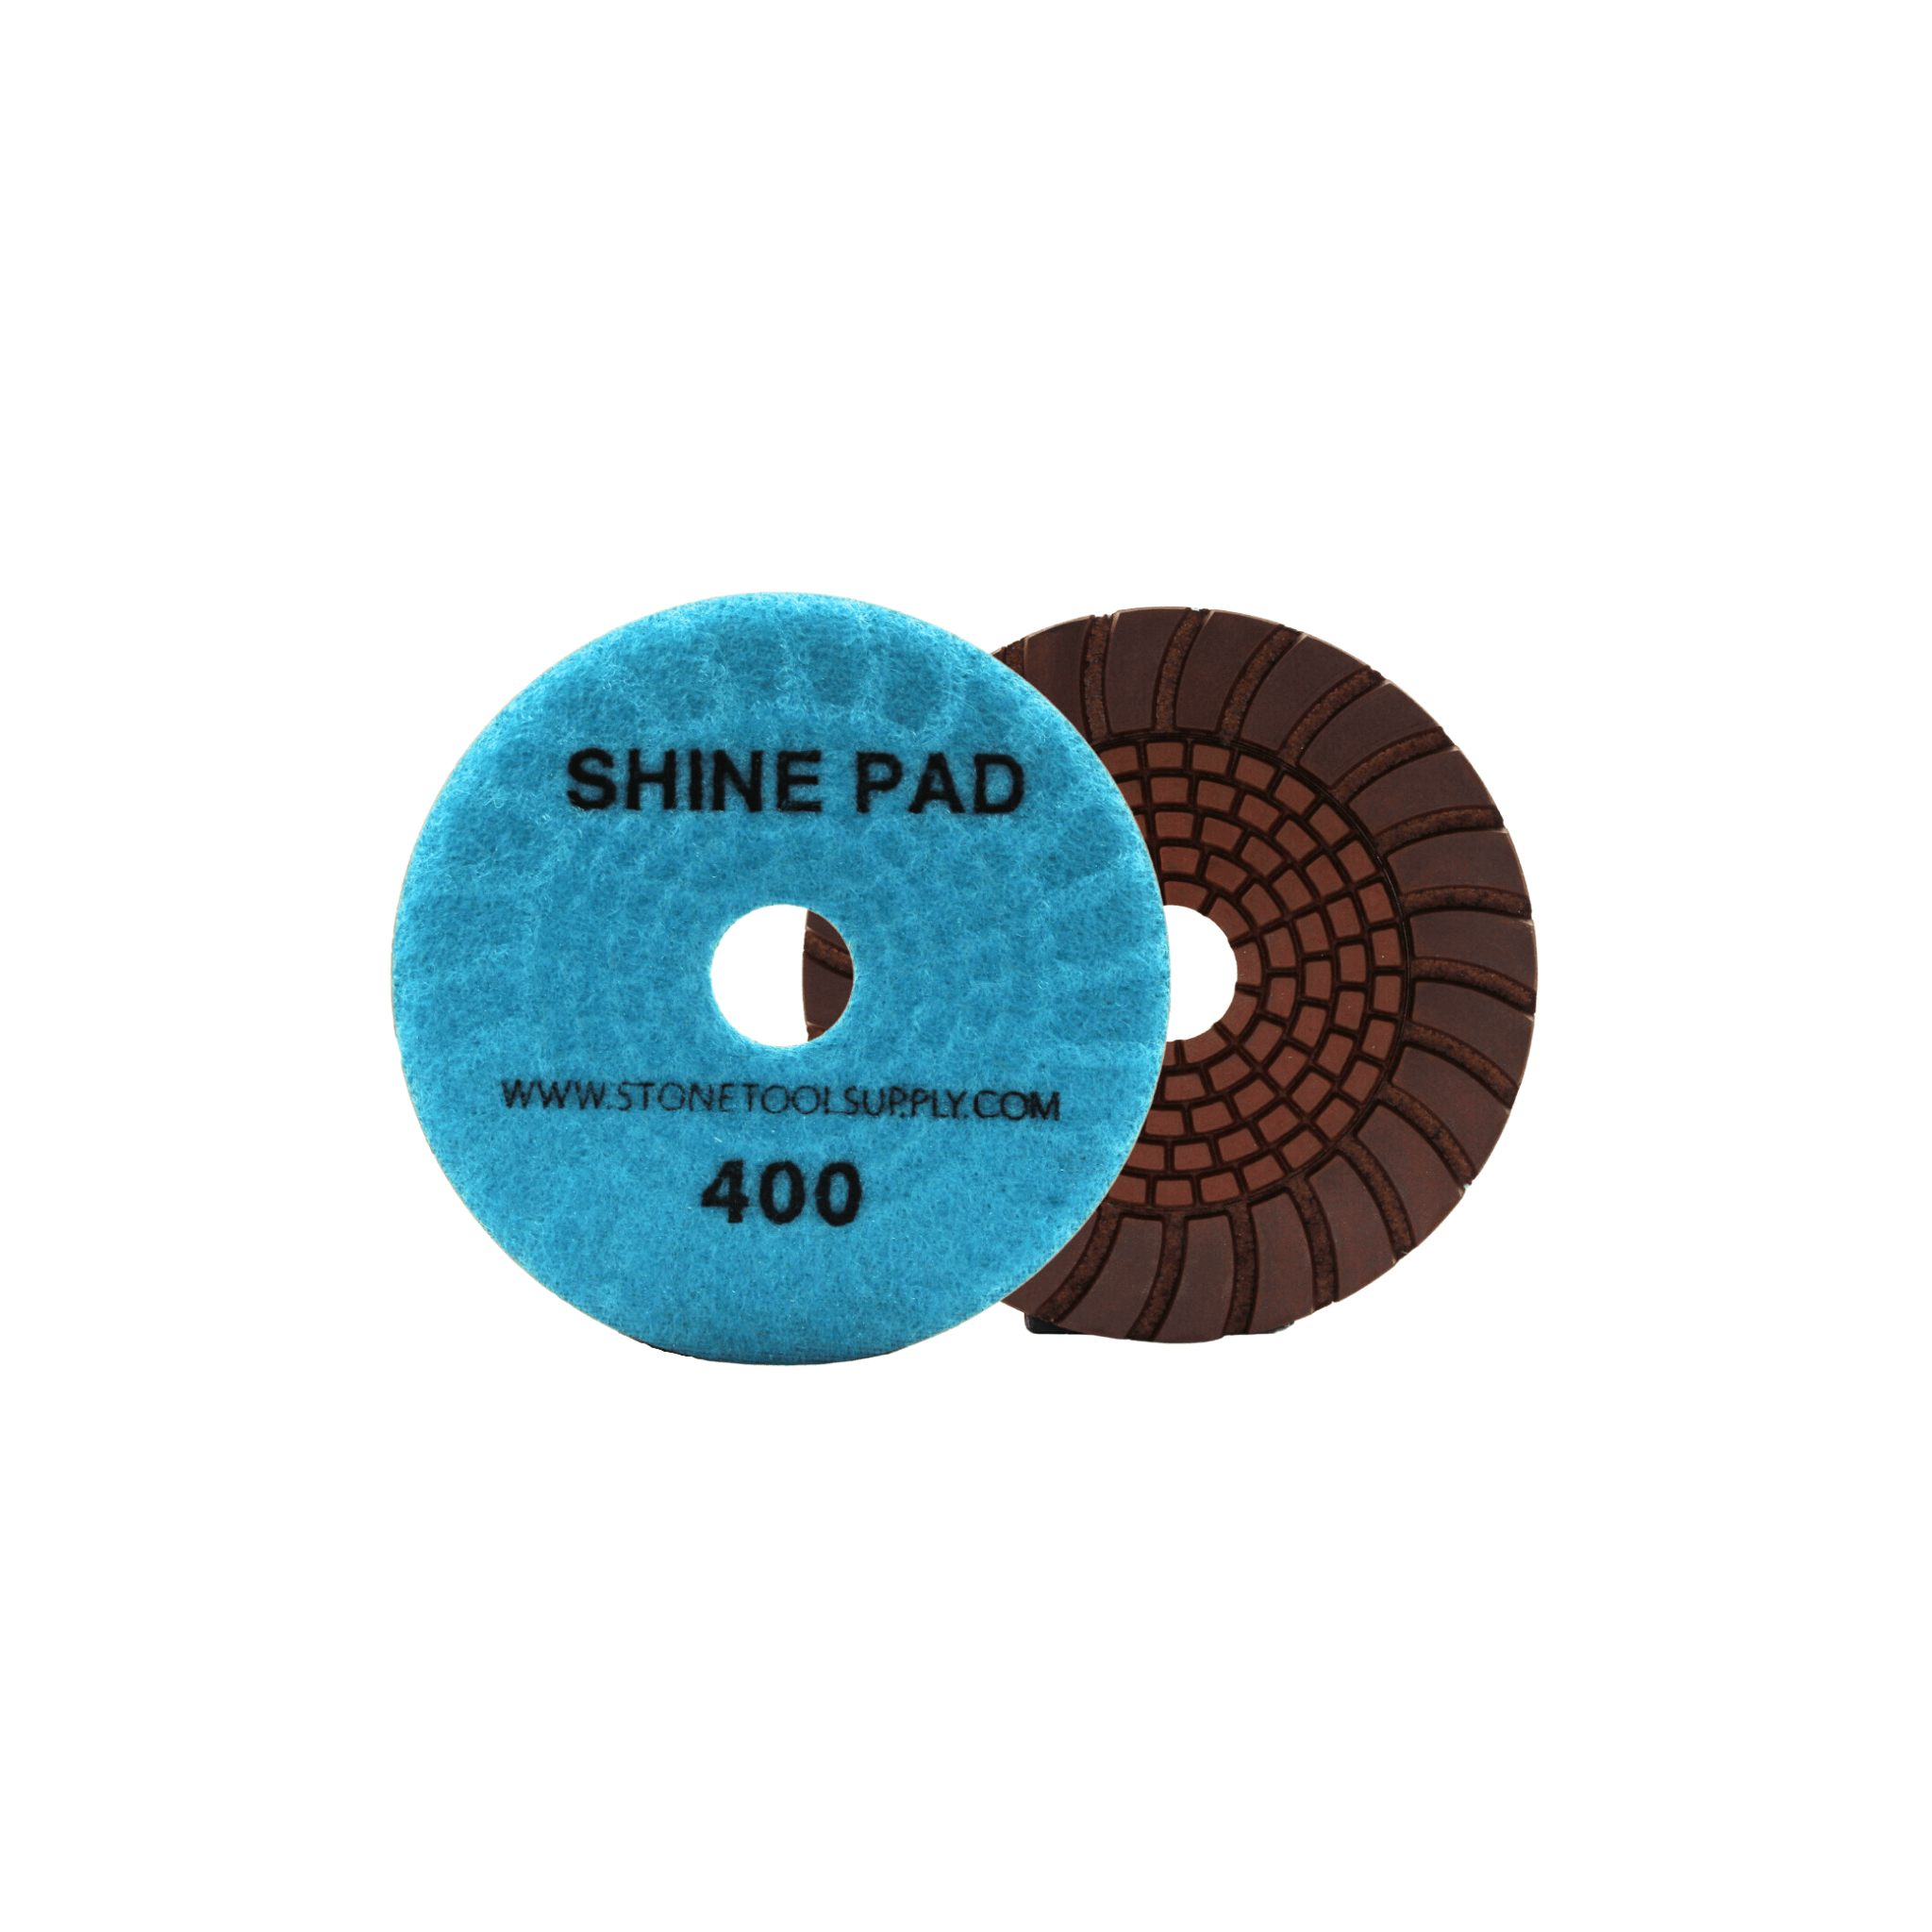 Copper and Resin Bonded 'Shine' Pad 4" #400 - Direct Stone Tool Supply, Inc